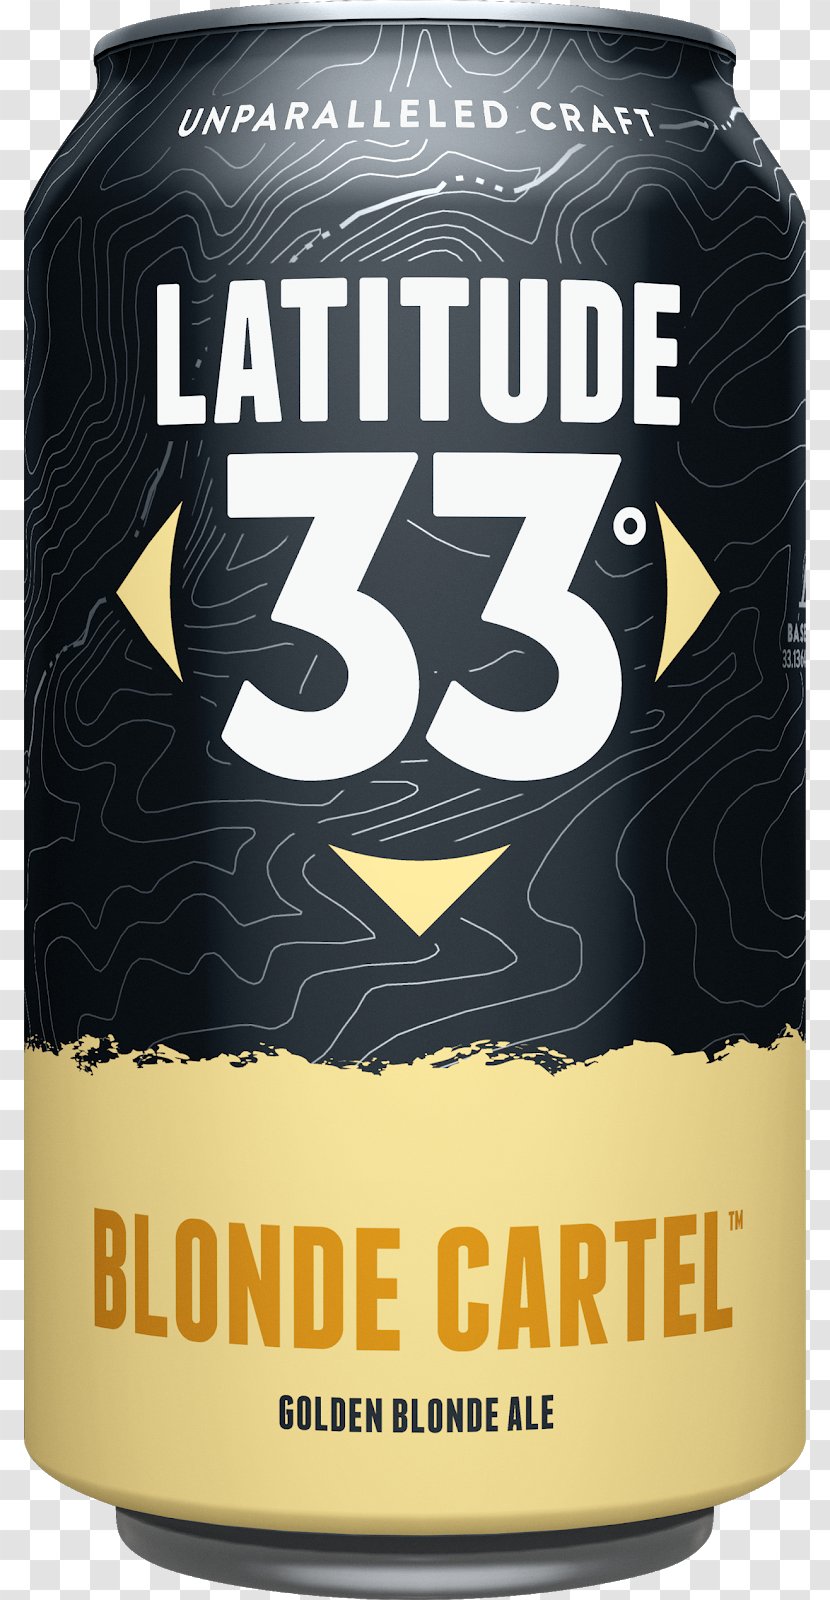 Latitude 33 Brewing Company India Pale Ale Alcoholic Drink Brand Brewery - Enough Refreshing Transparent PNG